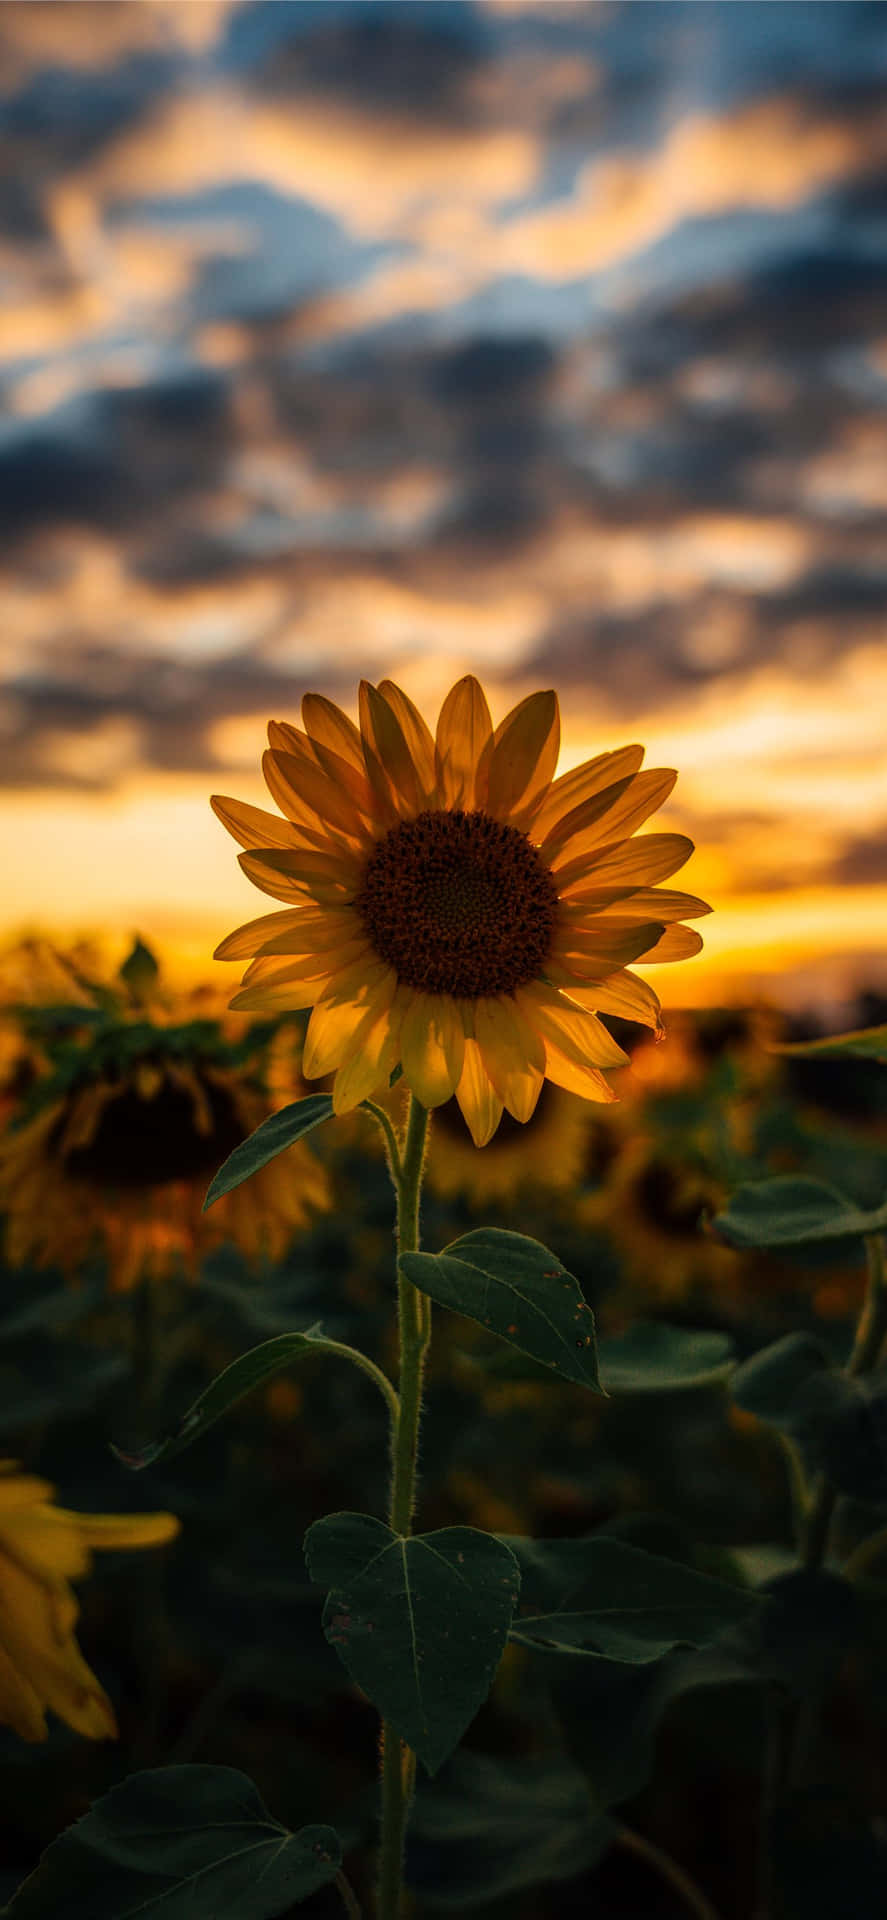 Download Enjoy the sunflower aesthetic for your iPhone Wallpaper   Wallpaperscom